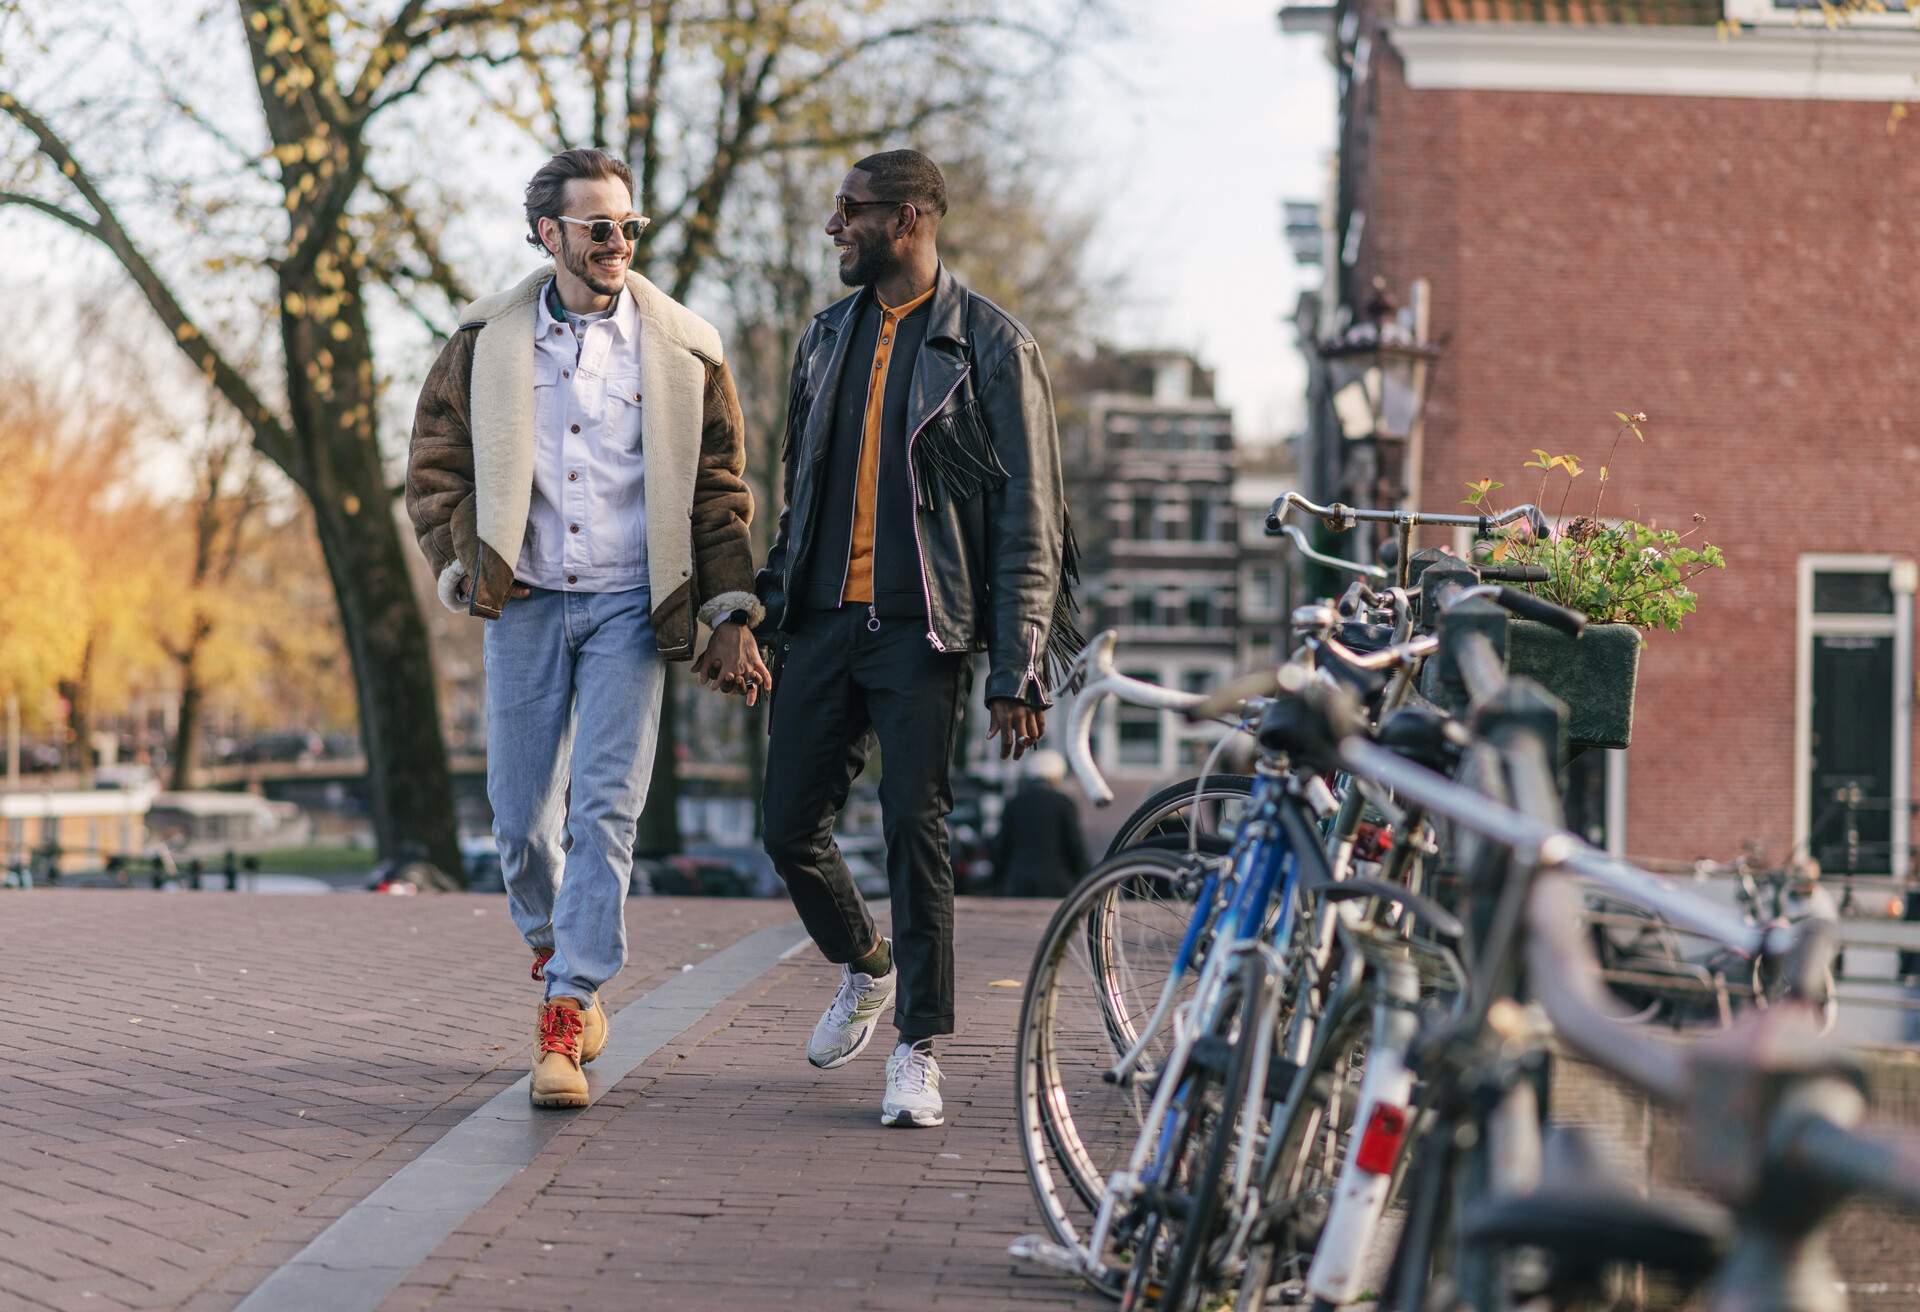 A gay couple in winter clothes walk hand in hand down a cobbled street lined with parked bicycles, Amsterdam, The Netherlands